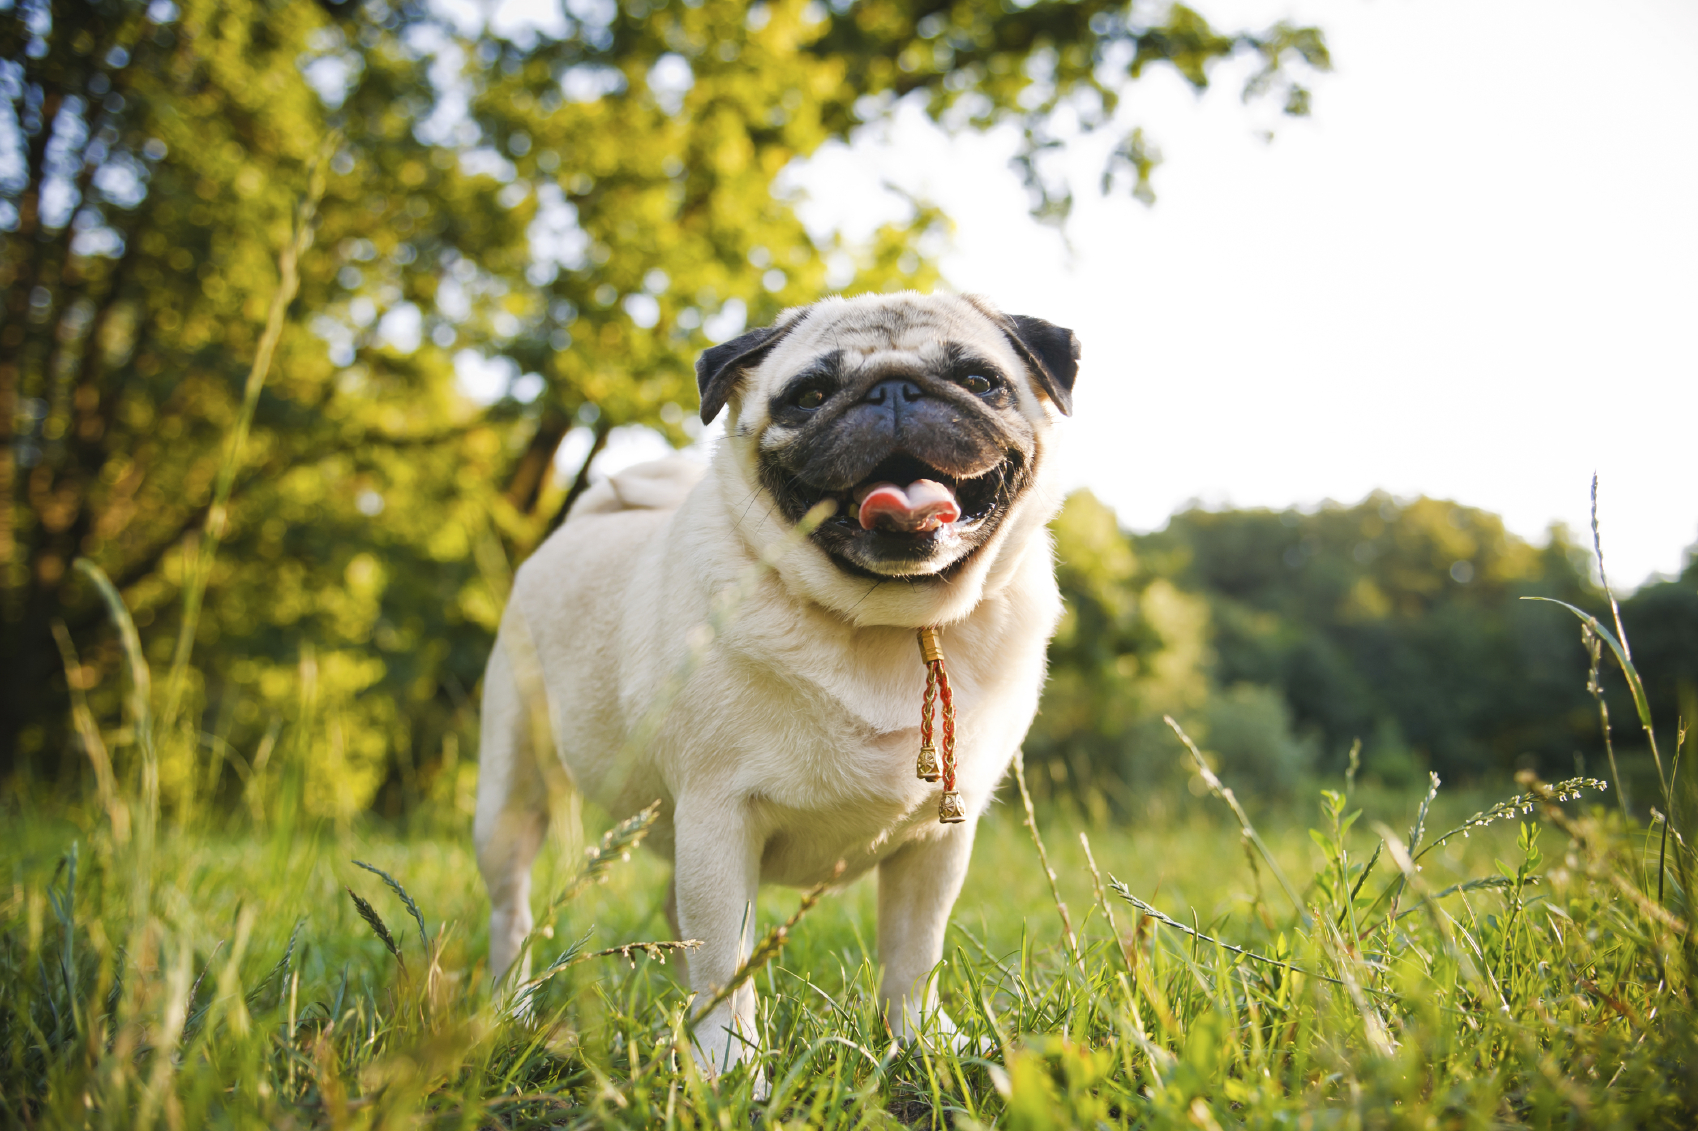 Pug smiling in some grass